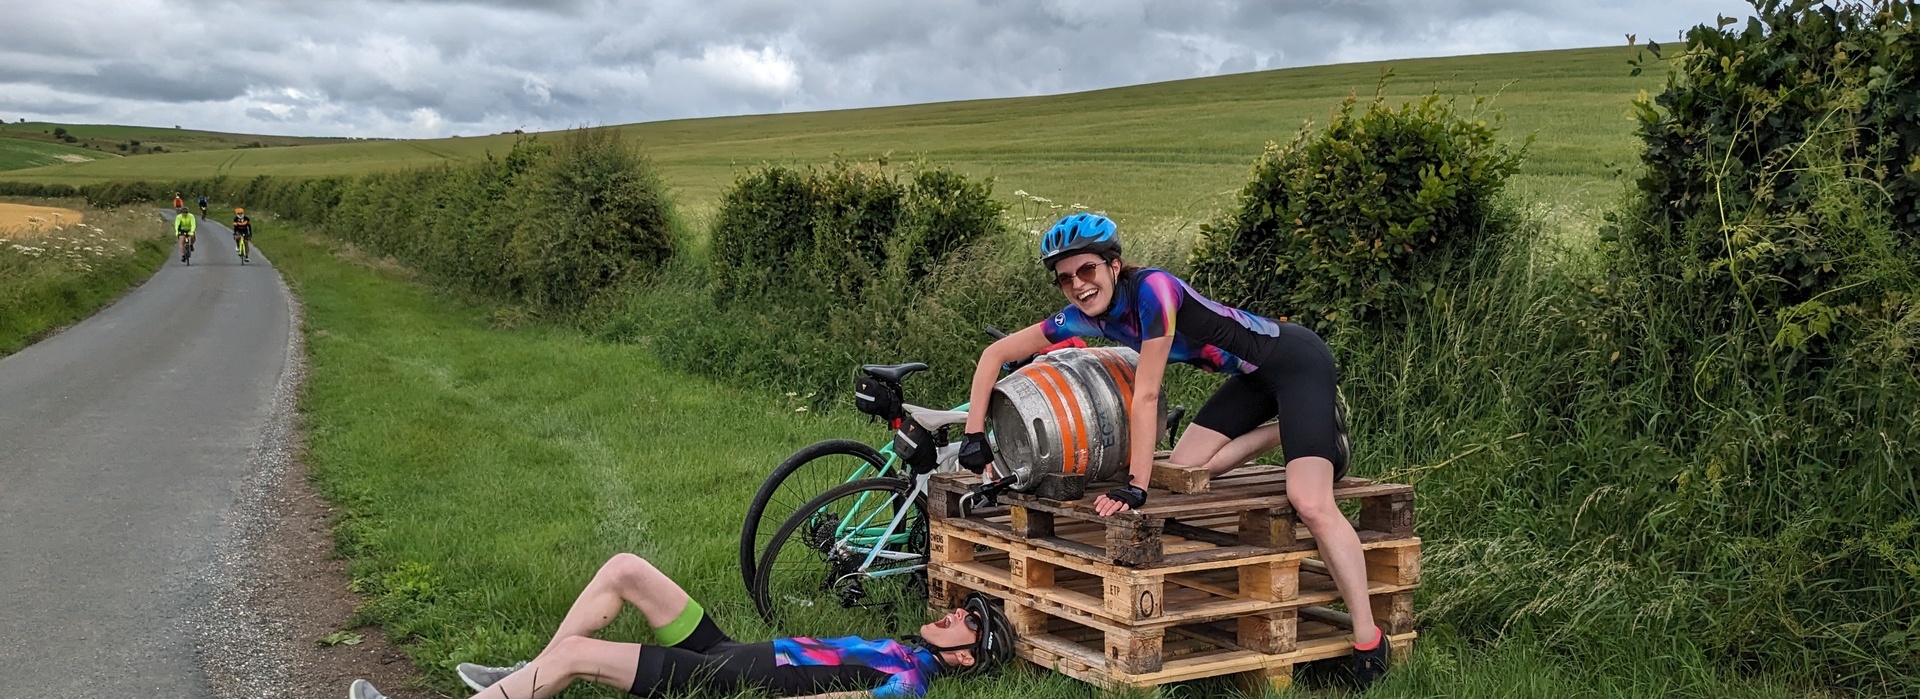 Cycling the biways of the Yorkshire Wolds